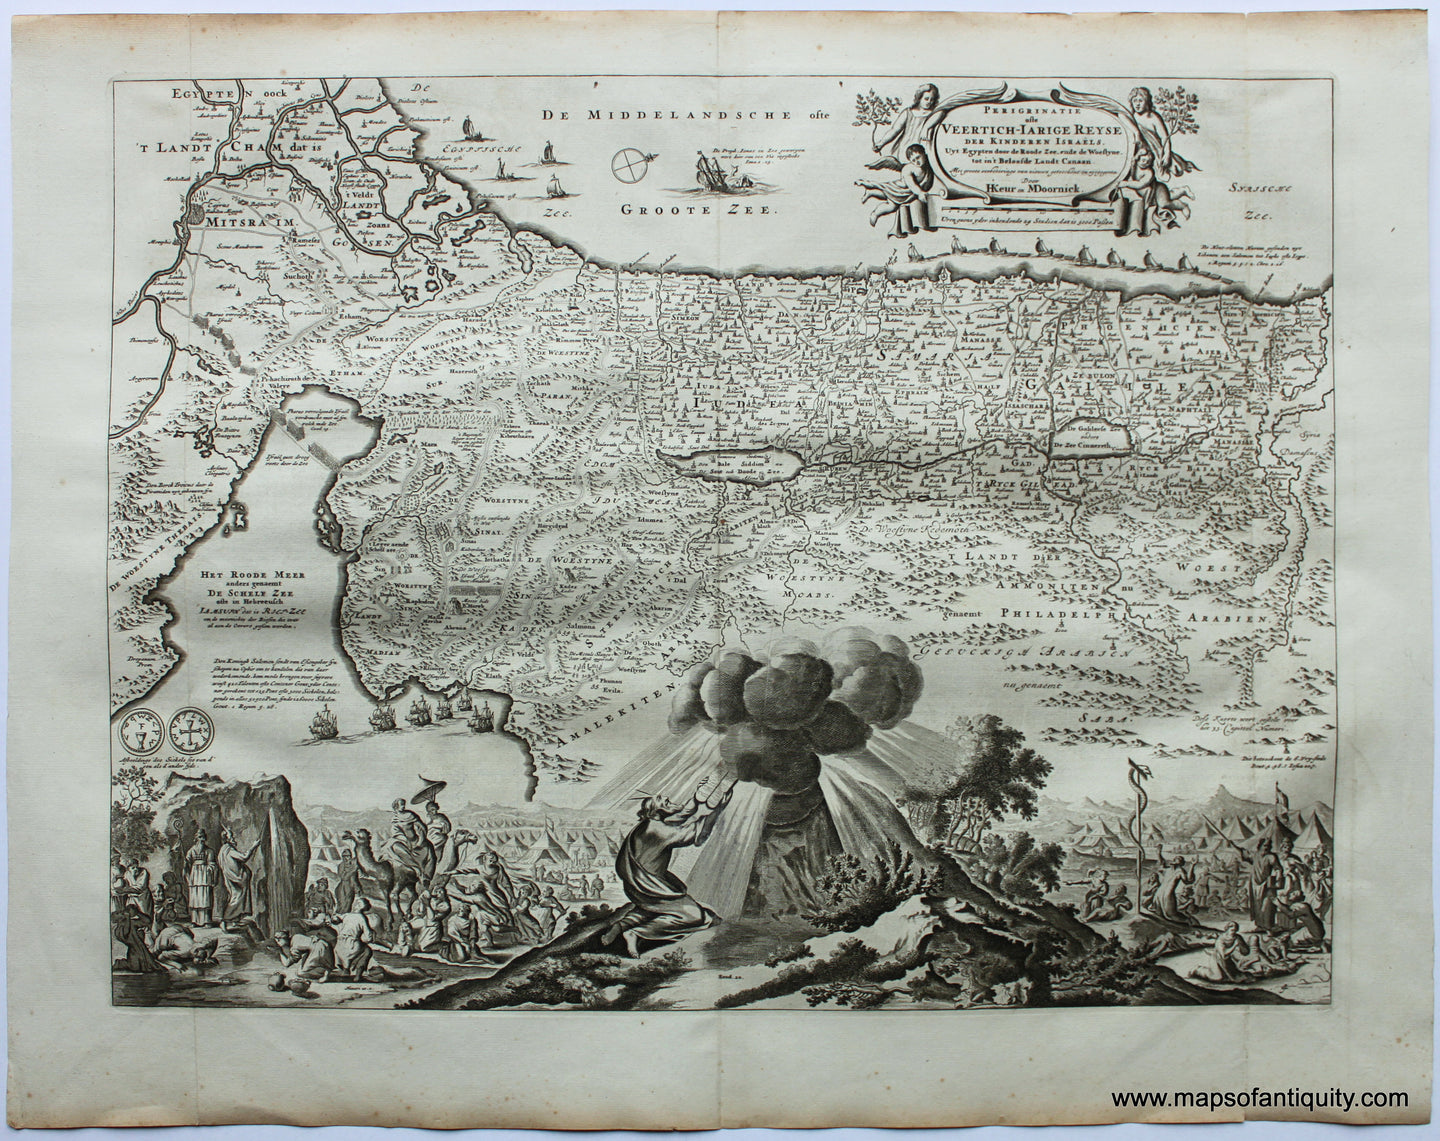 Antique-Uncolored-Map-Middle-East-&-Holy-Land---Perigrinatie-ofte-Veertich-jarige-Reyse-der-Kinderen-Israels.-**********-Middle-East-&-Holy-Land--c.-1700-Stoopendaal-Maps-Of-Antiquity